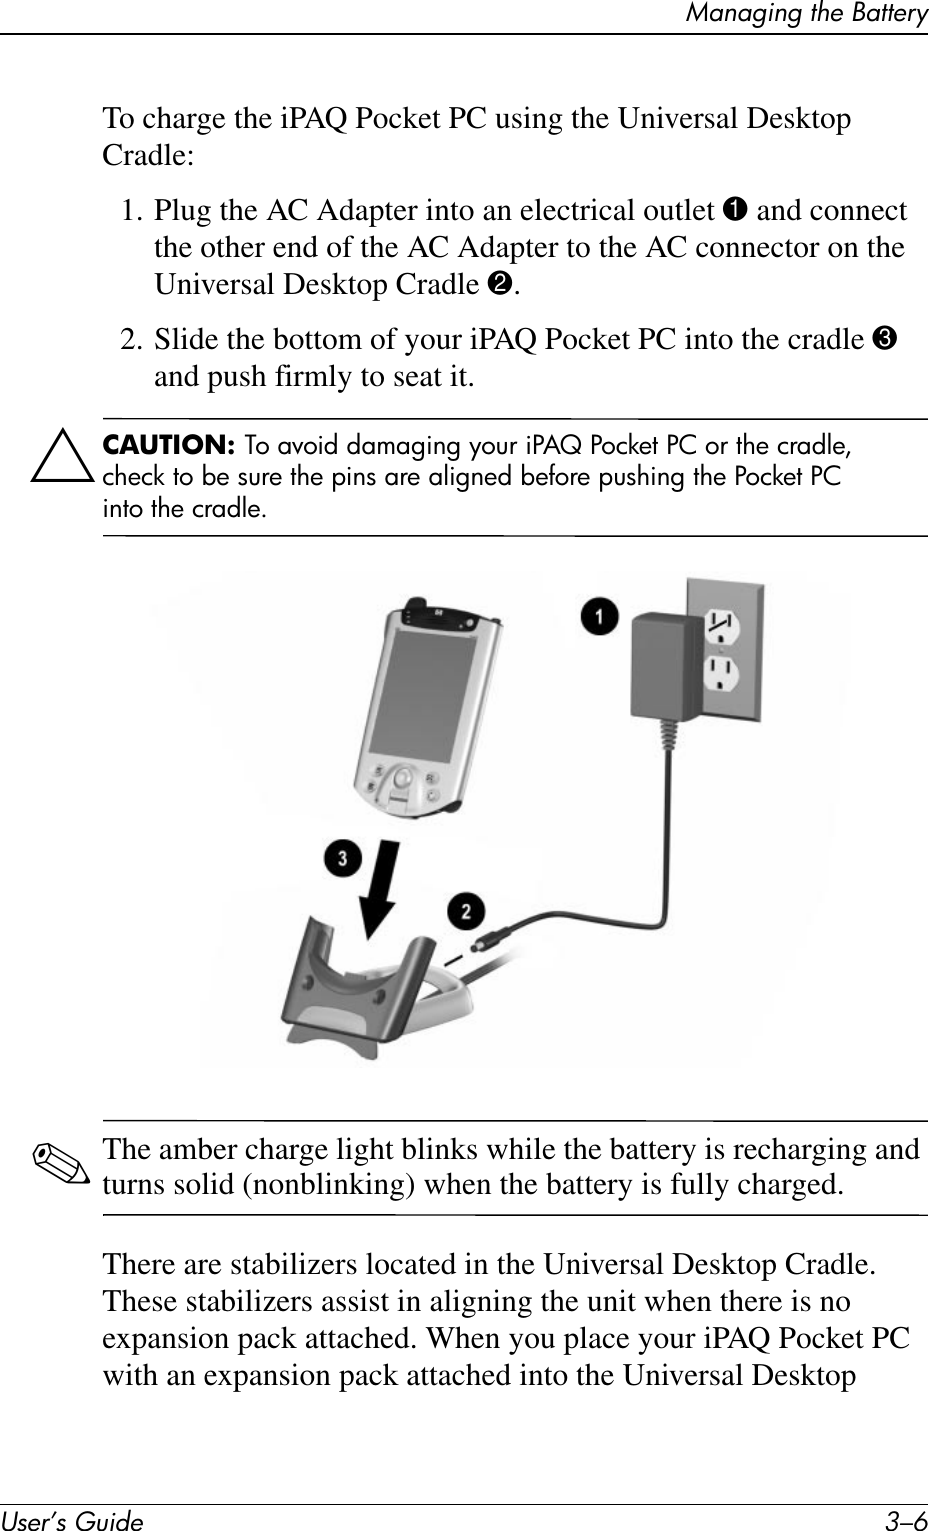 User’s Guide 3–6Managing the BatteryTo charge the iPAQ Pocket PC using the Universal Desktop Cradle:1. Plug the AC Adapter into an electrical outlet 1 and connect the other end of the AC Adapter to the AC connector on the Universal Desktop Cradle 2.2. Slide the bottom of your iPAQ Pocket PC into the cradle 3 and push firmly to seat it.ÄCAUTION: To avoid damaging your iPAQ Pocket PC or the cradle, check to be sure the pins are aligned before pushing the Pocket PC into the cradle.✎The amber charge light blinks while the battery is recharging and turns solid (nonblinking) when the battery is fully charged.There are stabilizers located in the Universal Desktop Cradle. These stabilizers assist in aligning the unit when there is no expansion pack attached. When you place your iPAQ Pocket PC with an expansion pack attached into the Universal Desktop 